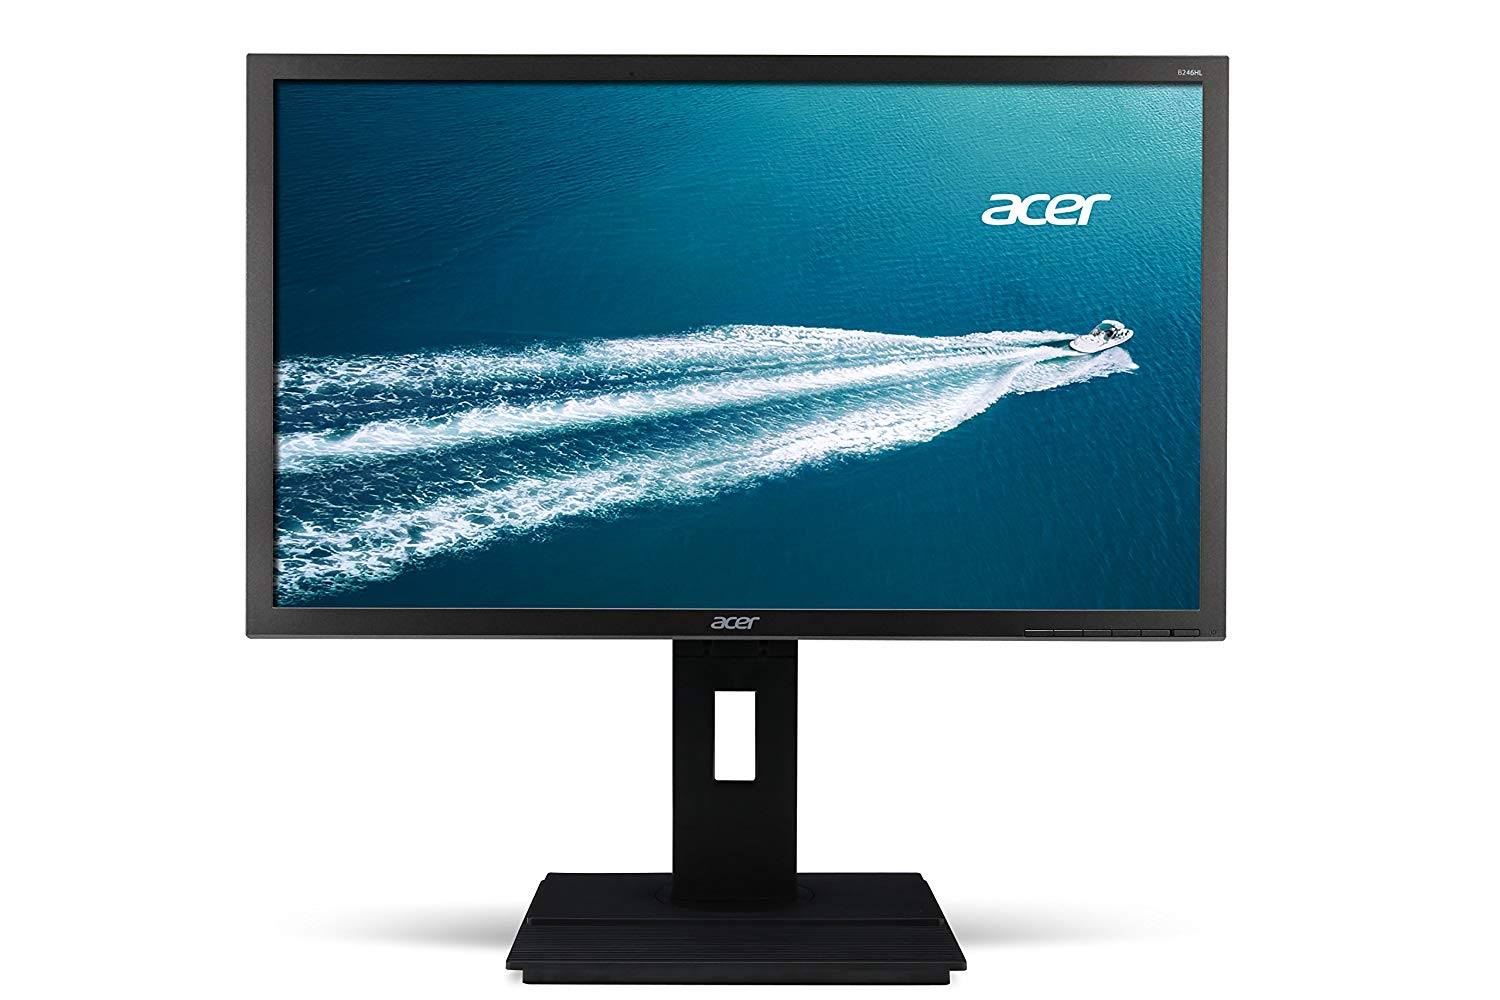 Acer B246WLAymidprzx 24in IPS Monitor